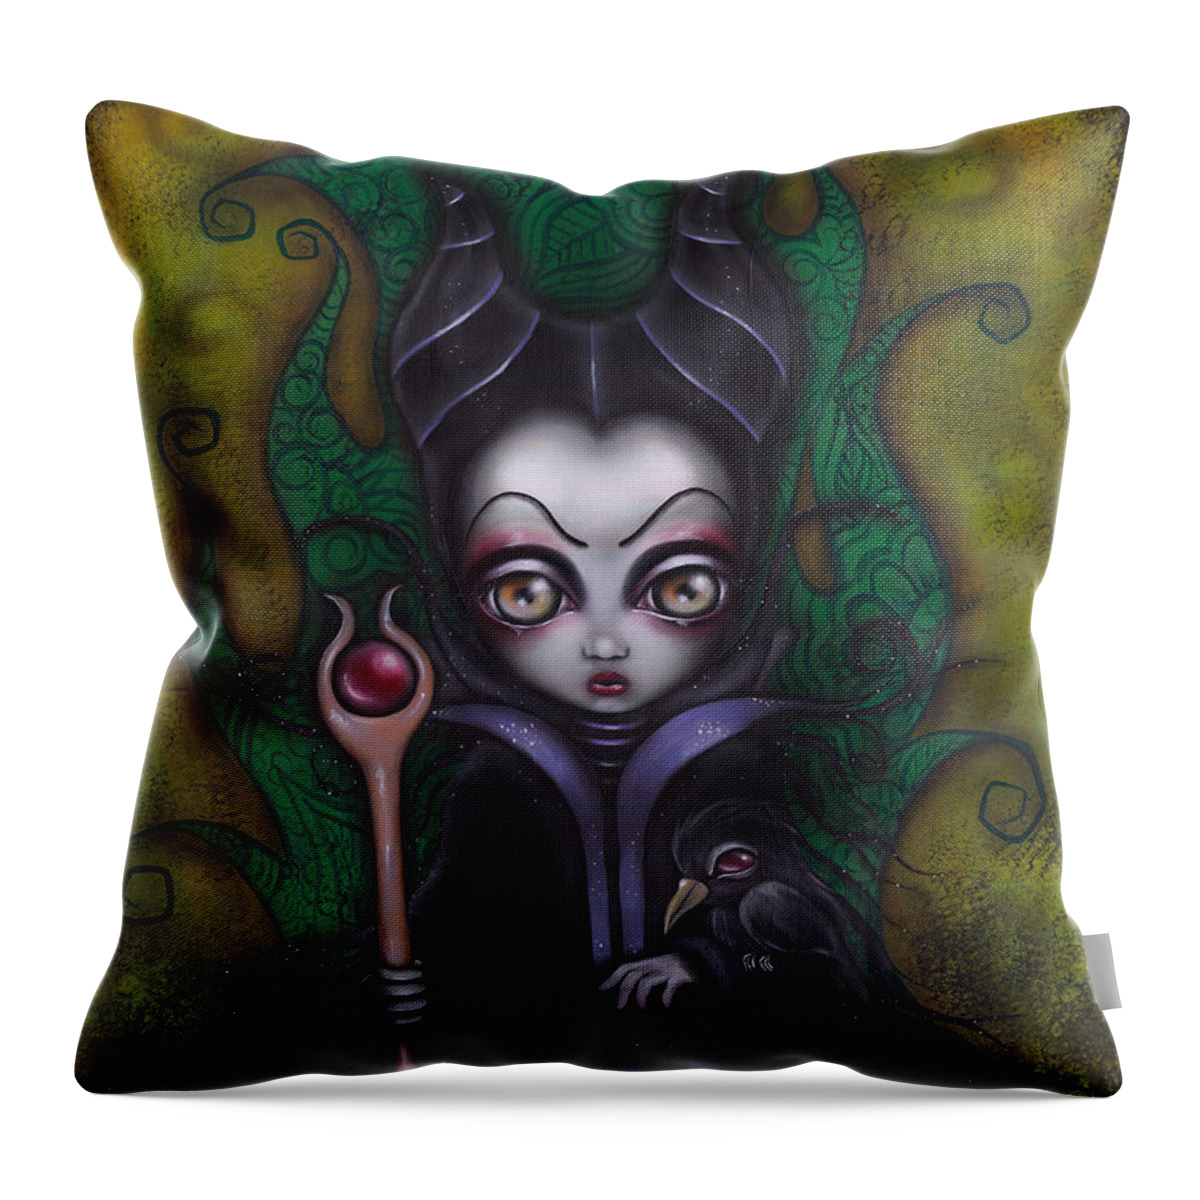 Villains Throw Pillow featuring the painting Maleficent by Abril Andrade